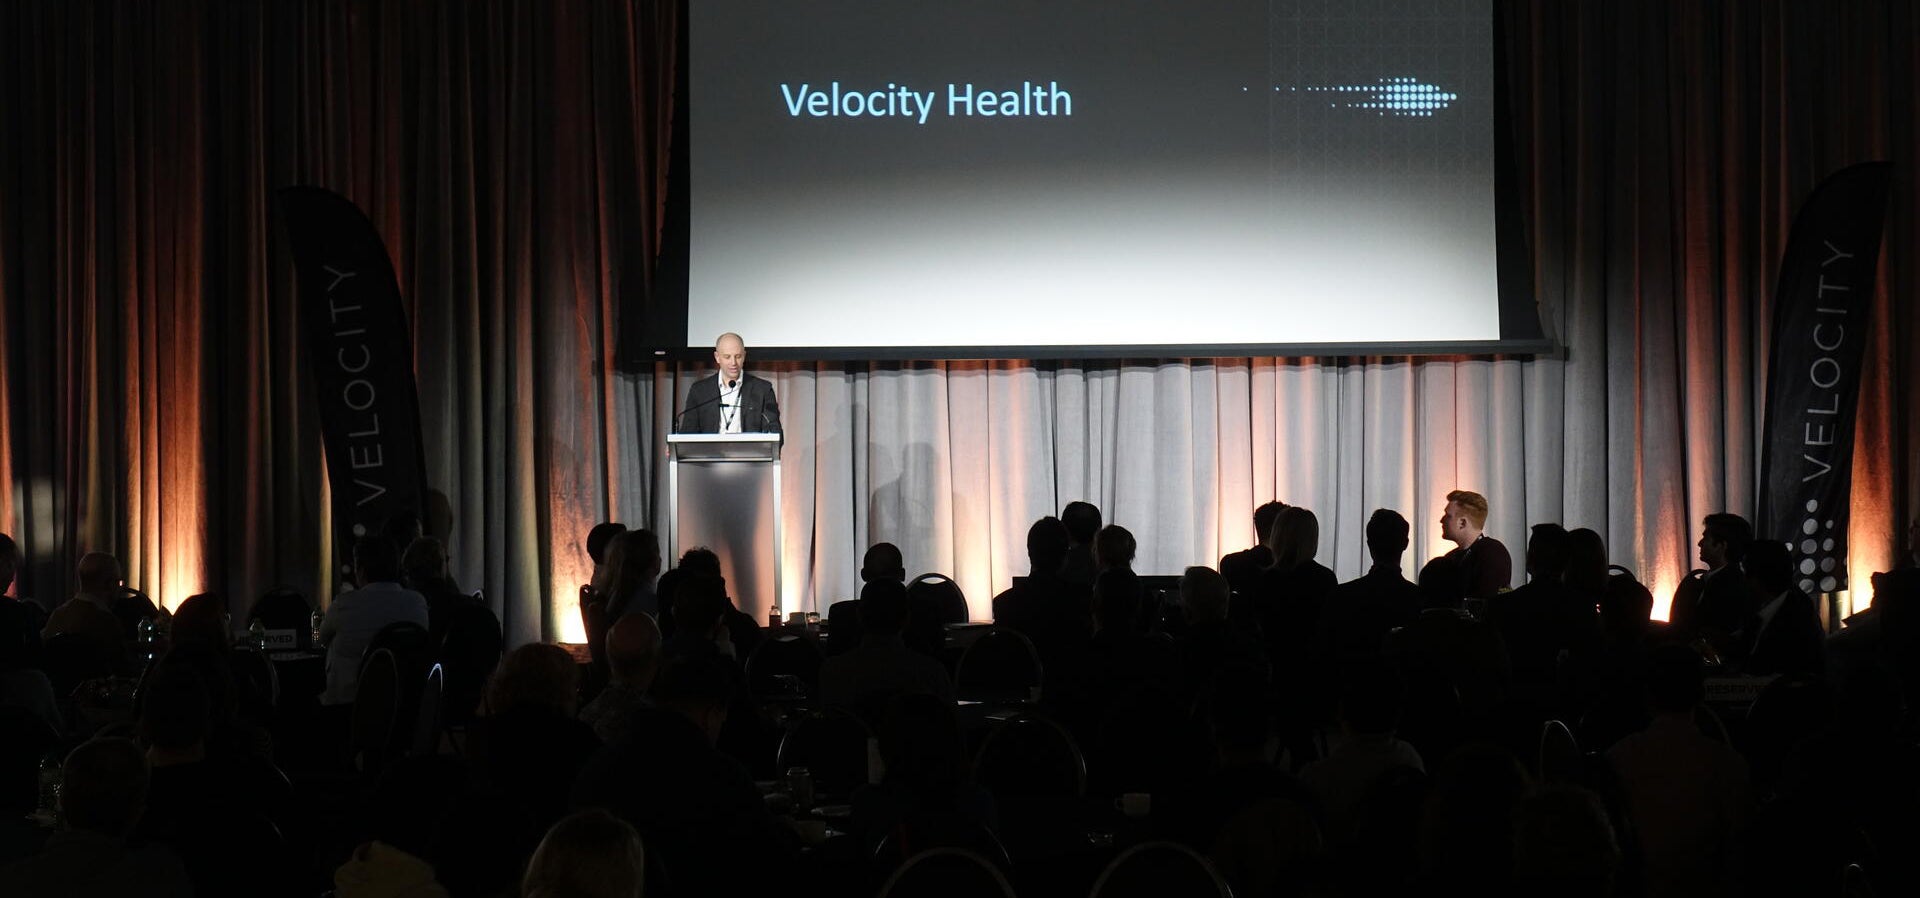 Man speaking at podium with Velocity Health on screen behind him.